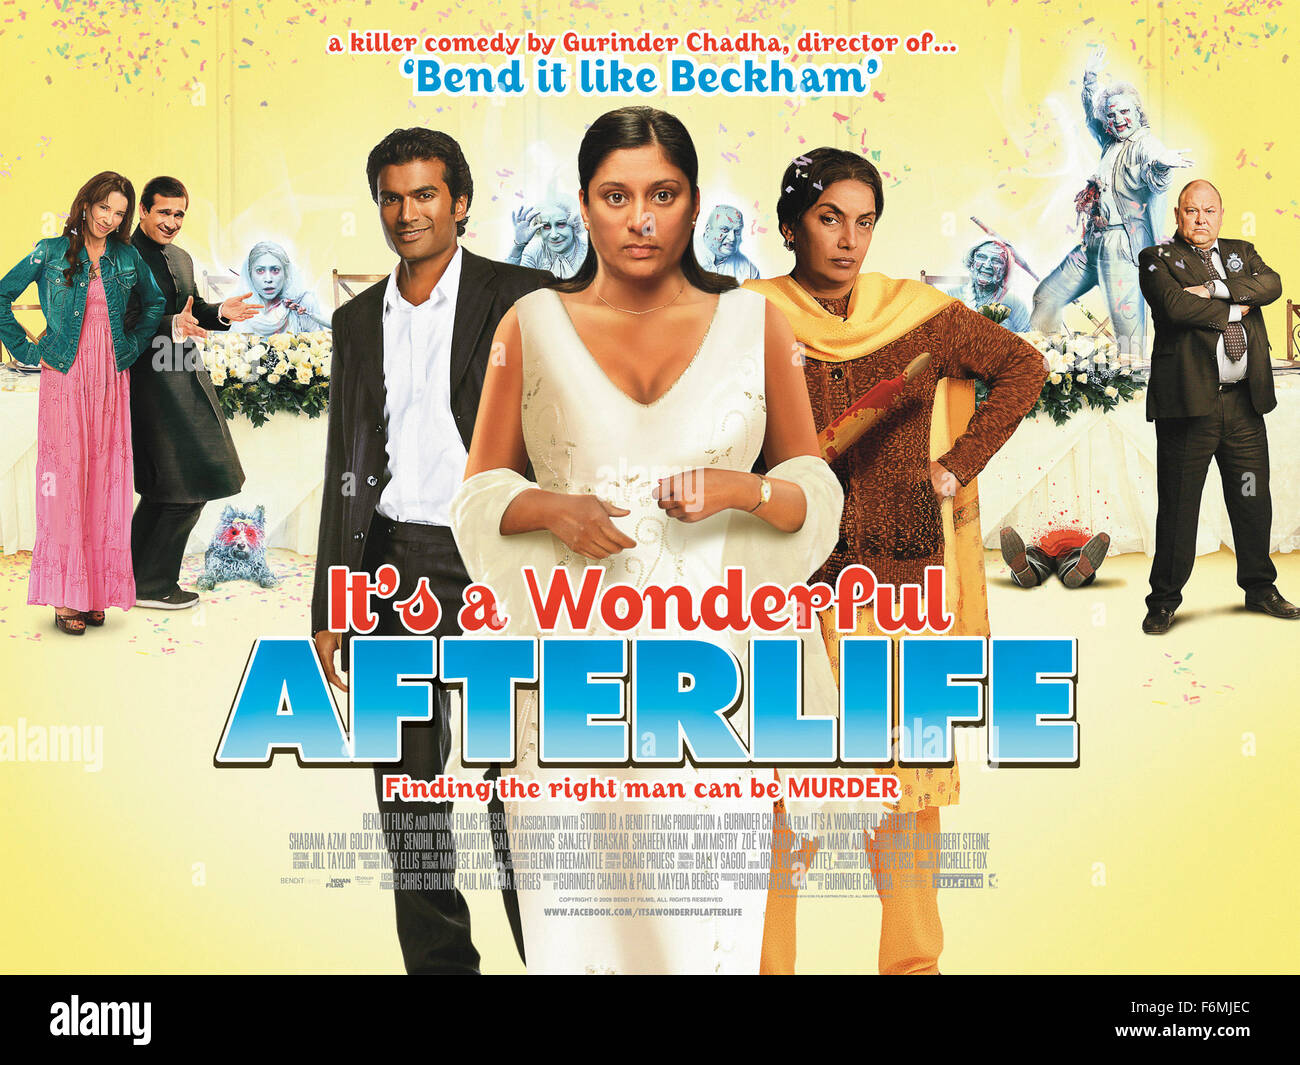 RELEASE DATE: January 26, 2010 MOVIE TITLE: It's a Wonderful Afterlife  STUDIO: Bend It Films DIRECTOR: Gurinder Chadha PLOT: A comedy centered on  an Indian mother who takes her obsession with marriage